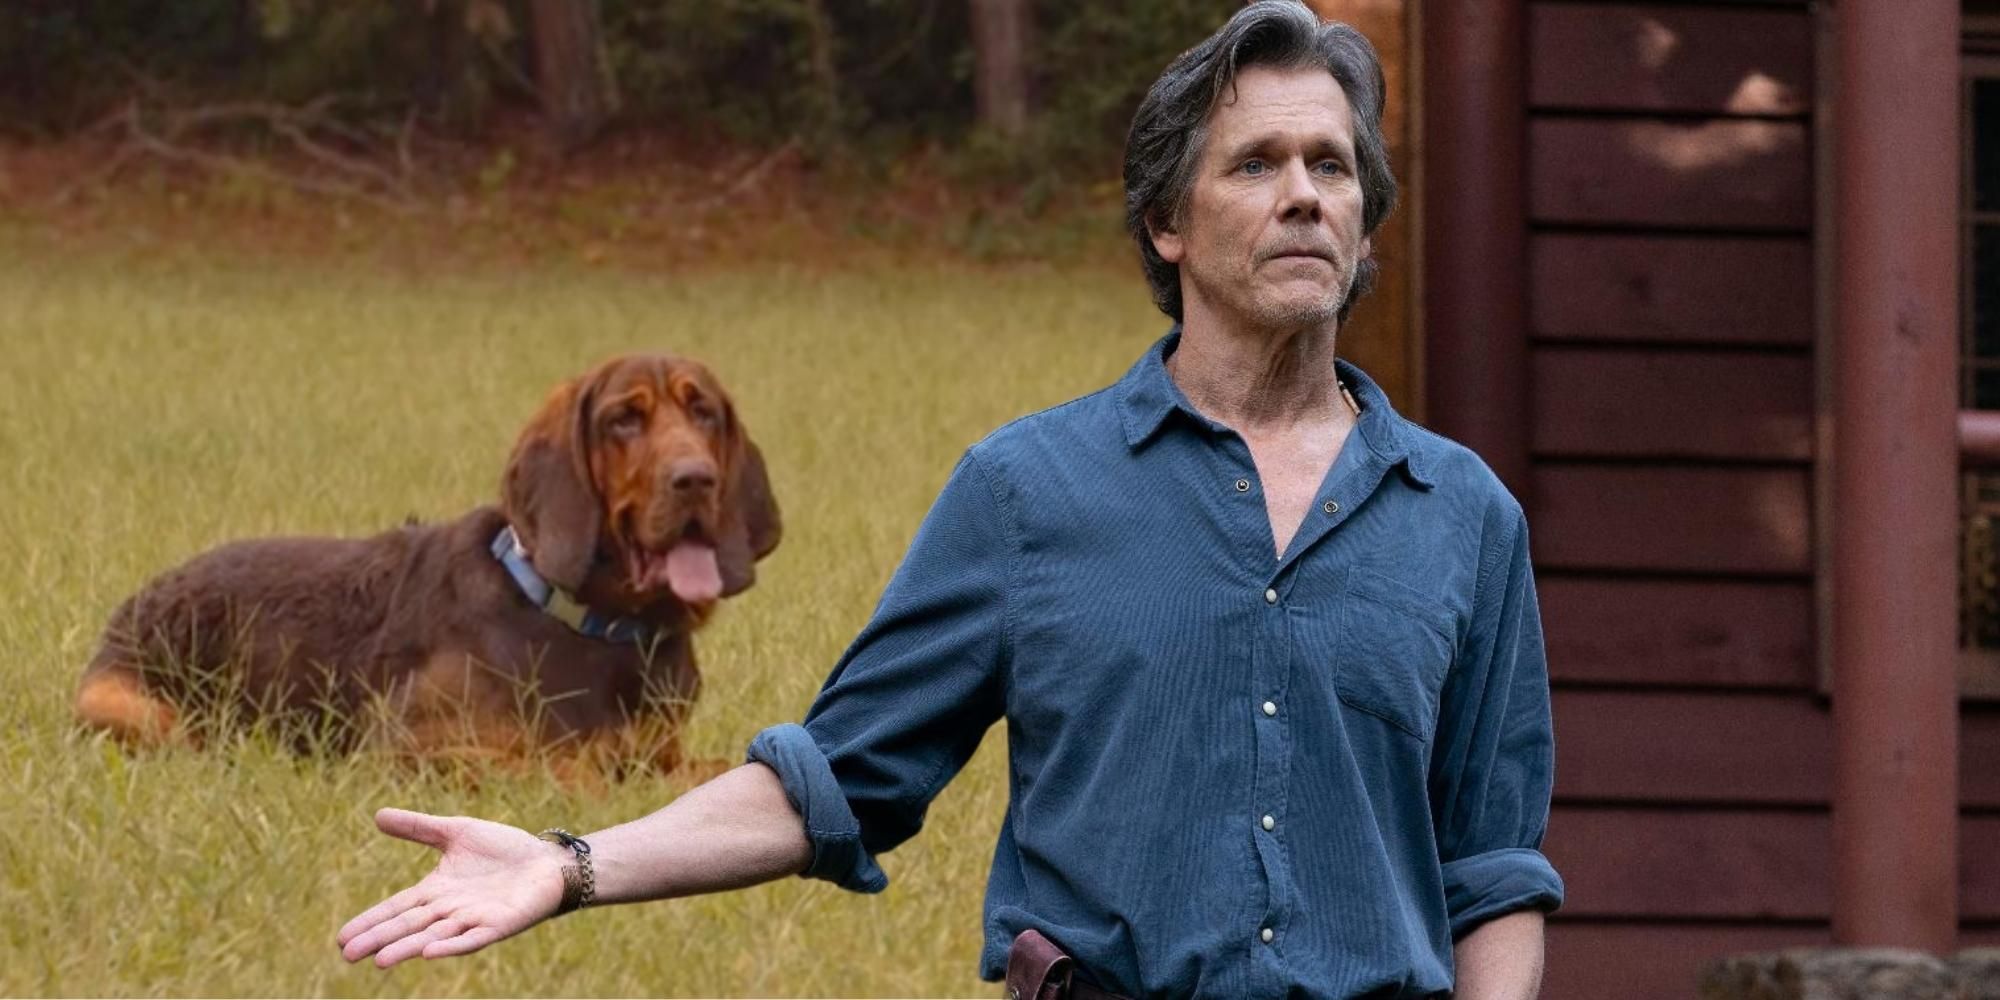 Kevin Bacon as Owen Whistler with Duke in They/Them